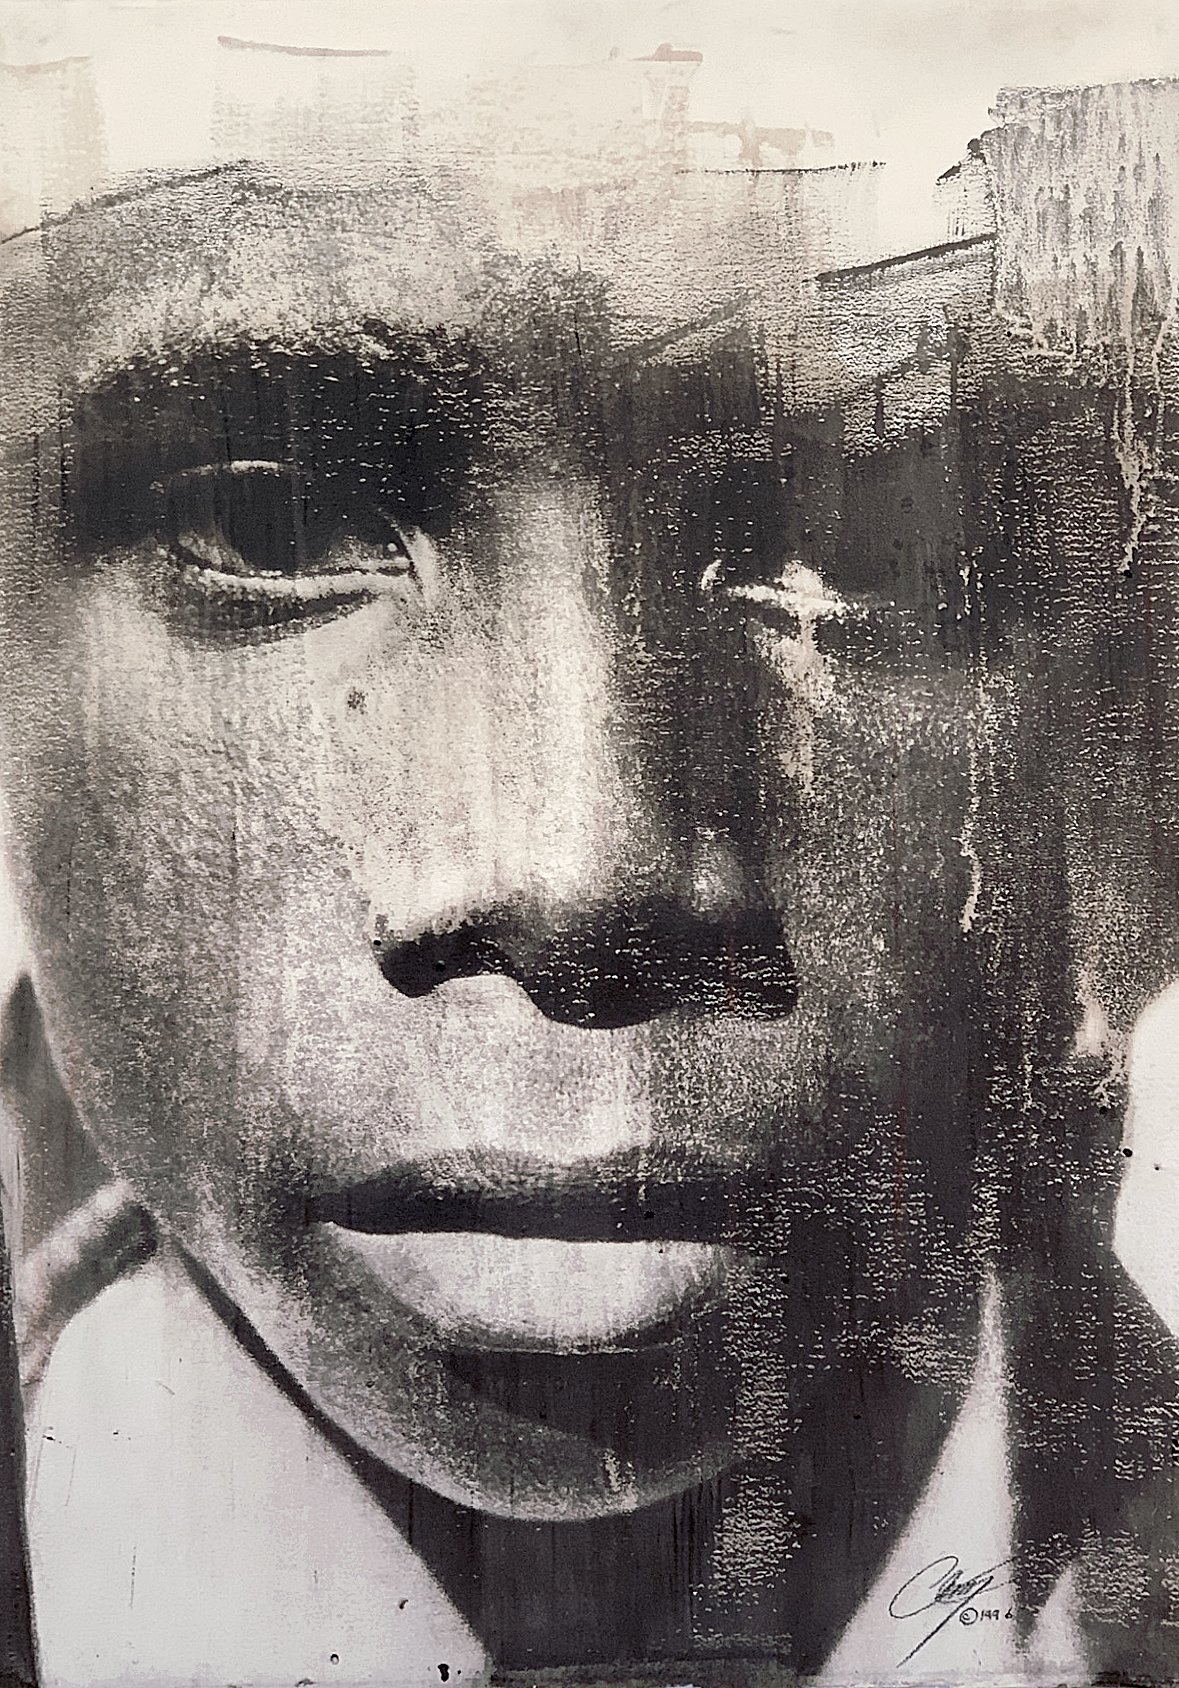  © Donald E. Camp,  Young Man #3 – Million Man March,  Casein and raw earth pigment on archival rag paper, Photographic Casein Monoprints, 41 x 29 inches, 1996 